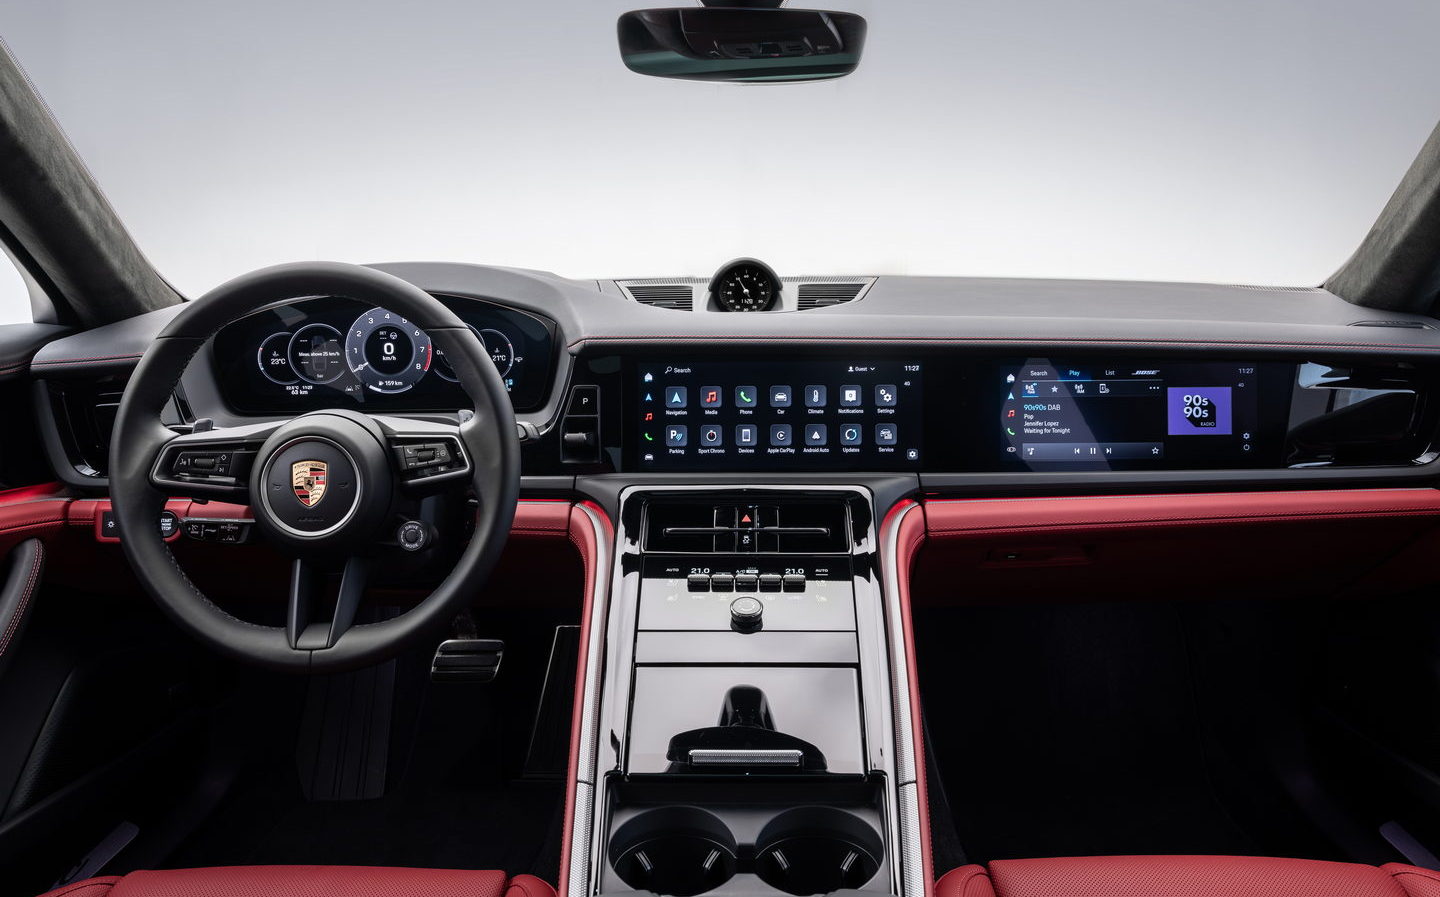 New Porsche Panamera luxury saloon gains the highly digitised interior of the Taycan EV